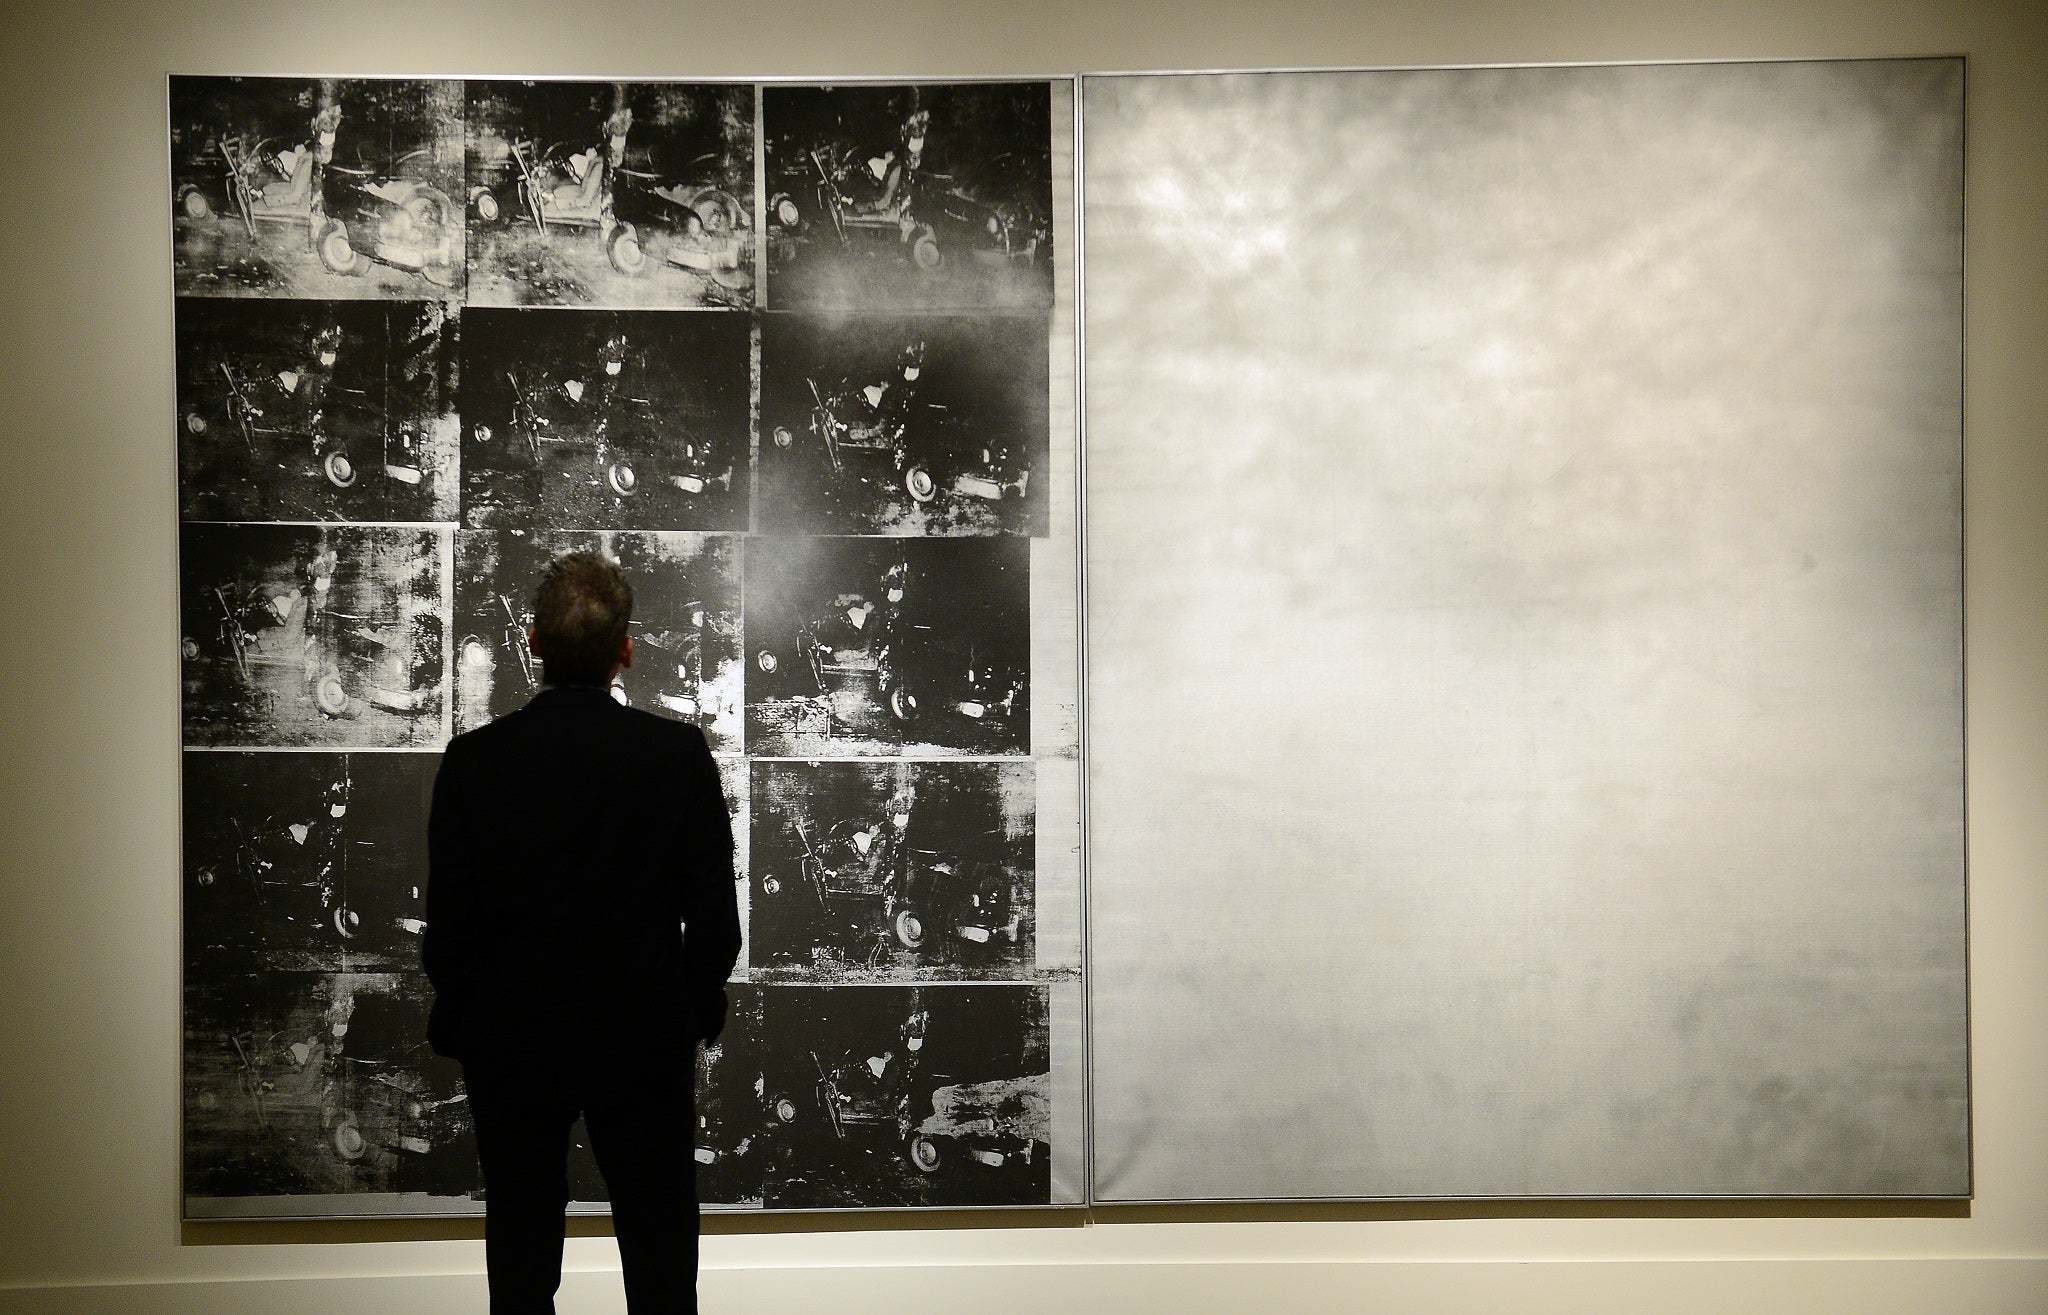 Andy Warhol's "Silver Car Crash" sold for $105m at auction in New York